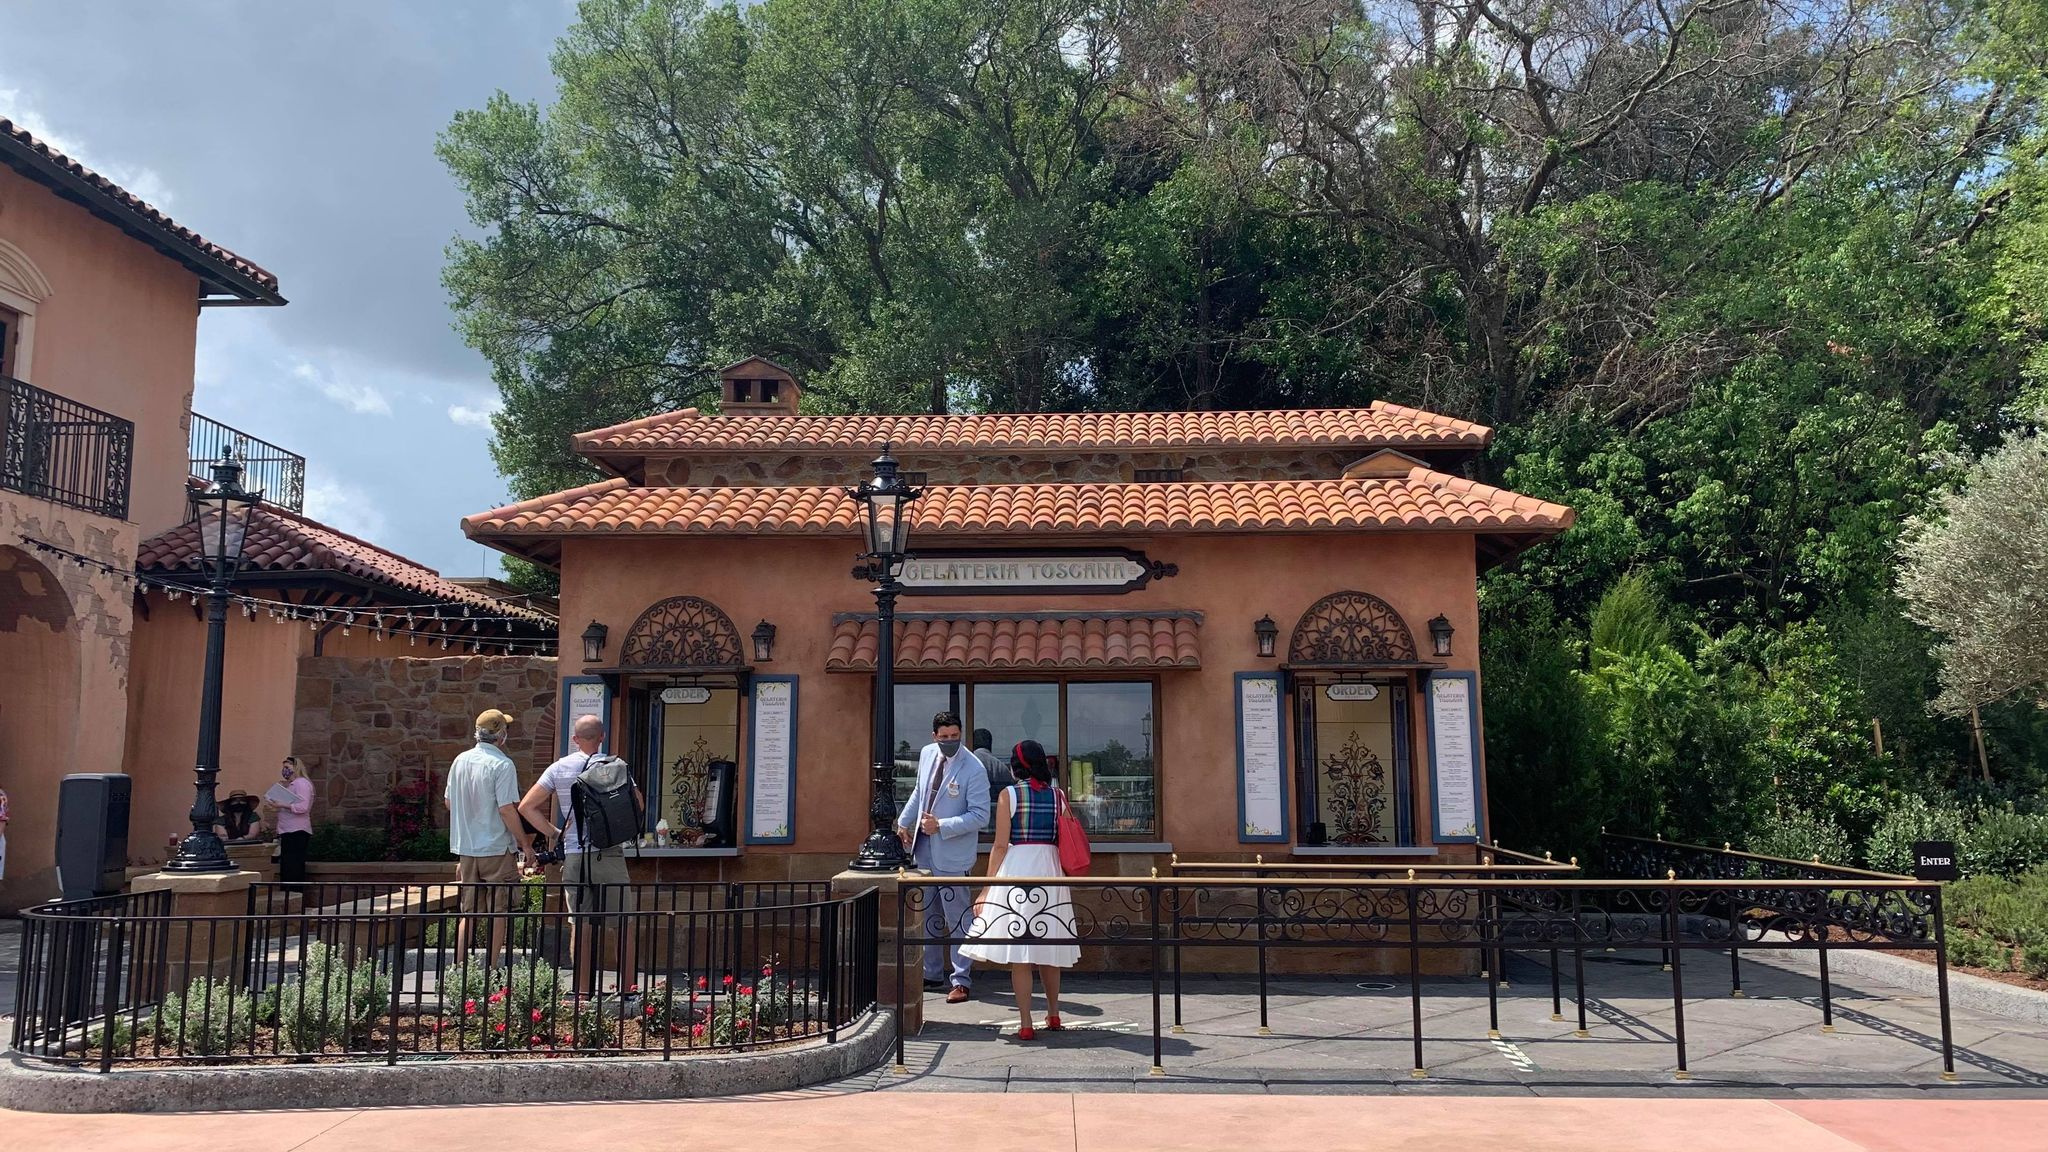 First look at the new Gelateria Toscana in Epcot